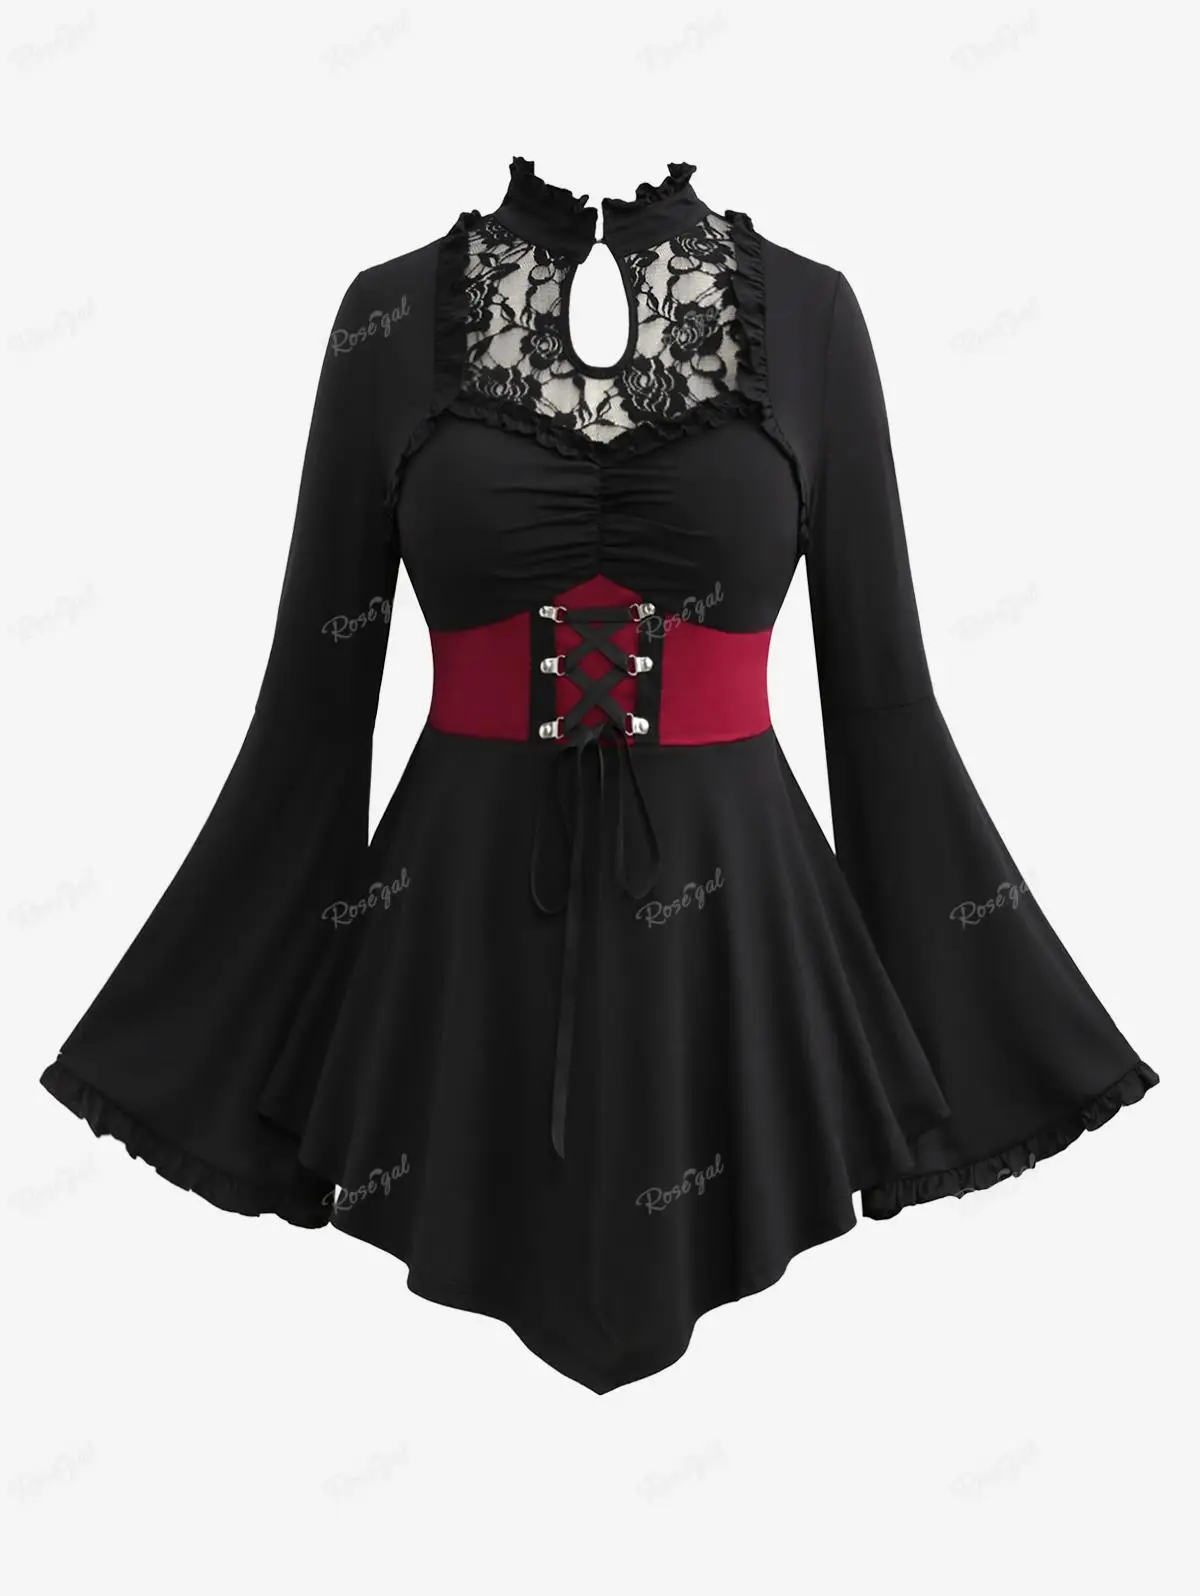 

ROSEGAL Plus Size Gothic T-shirt Floral Lace Panel Ruched Lace Up Keyhole Flare Sleeves Asymmetric Corset Tops New Black Tees